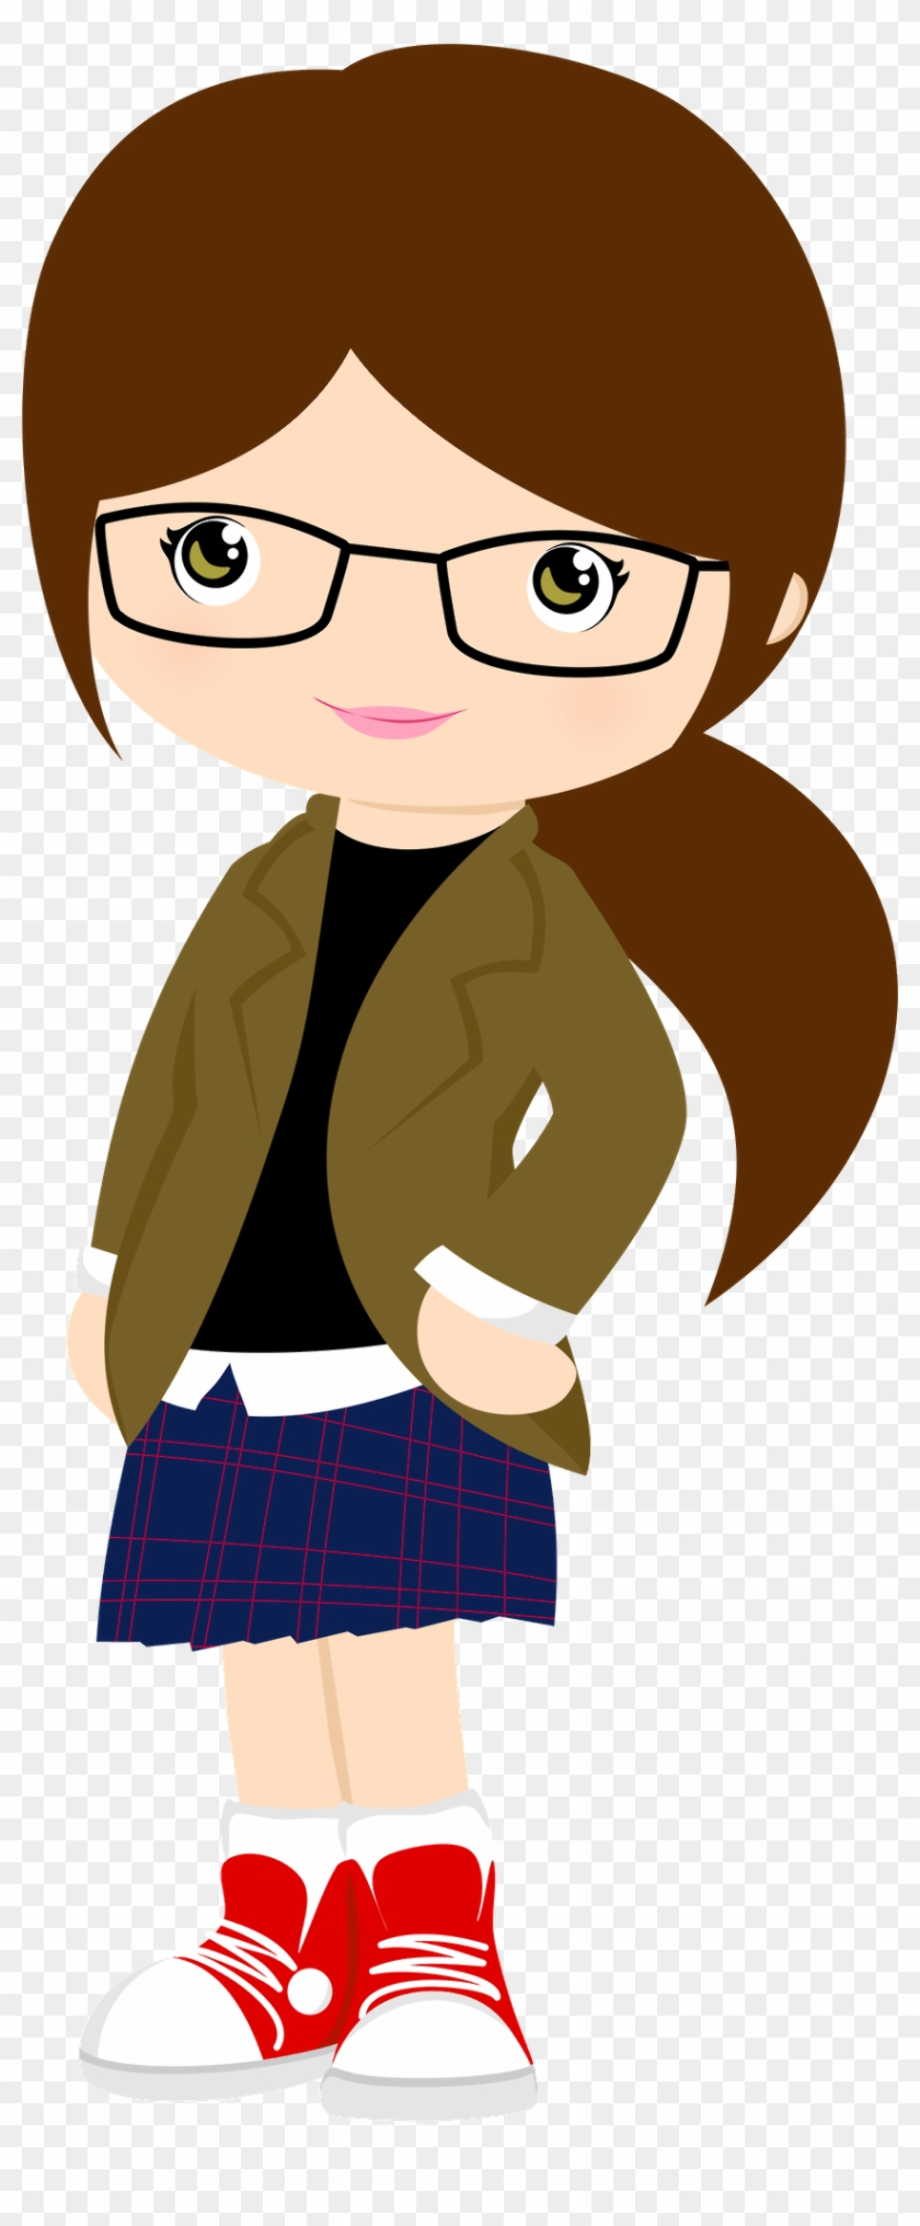 Download High Quality glasses clipart woman Transparent PNG Images